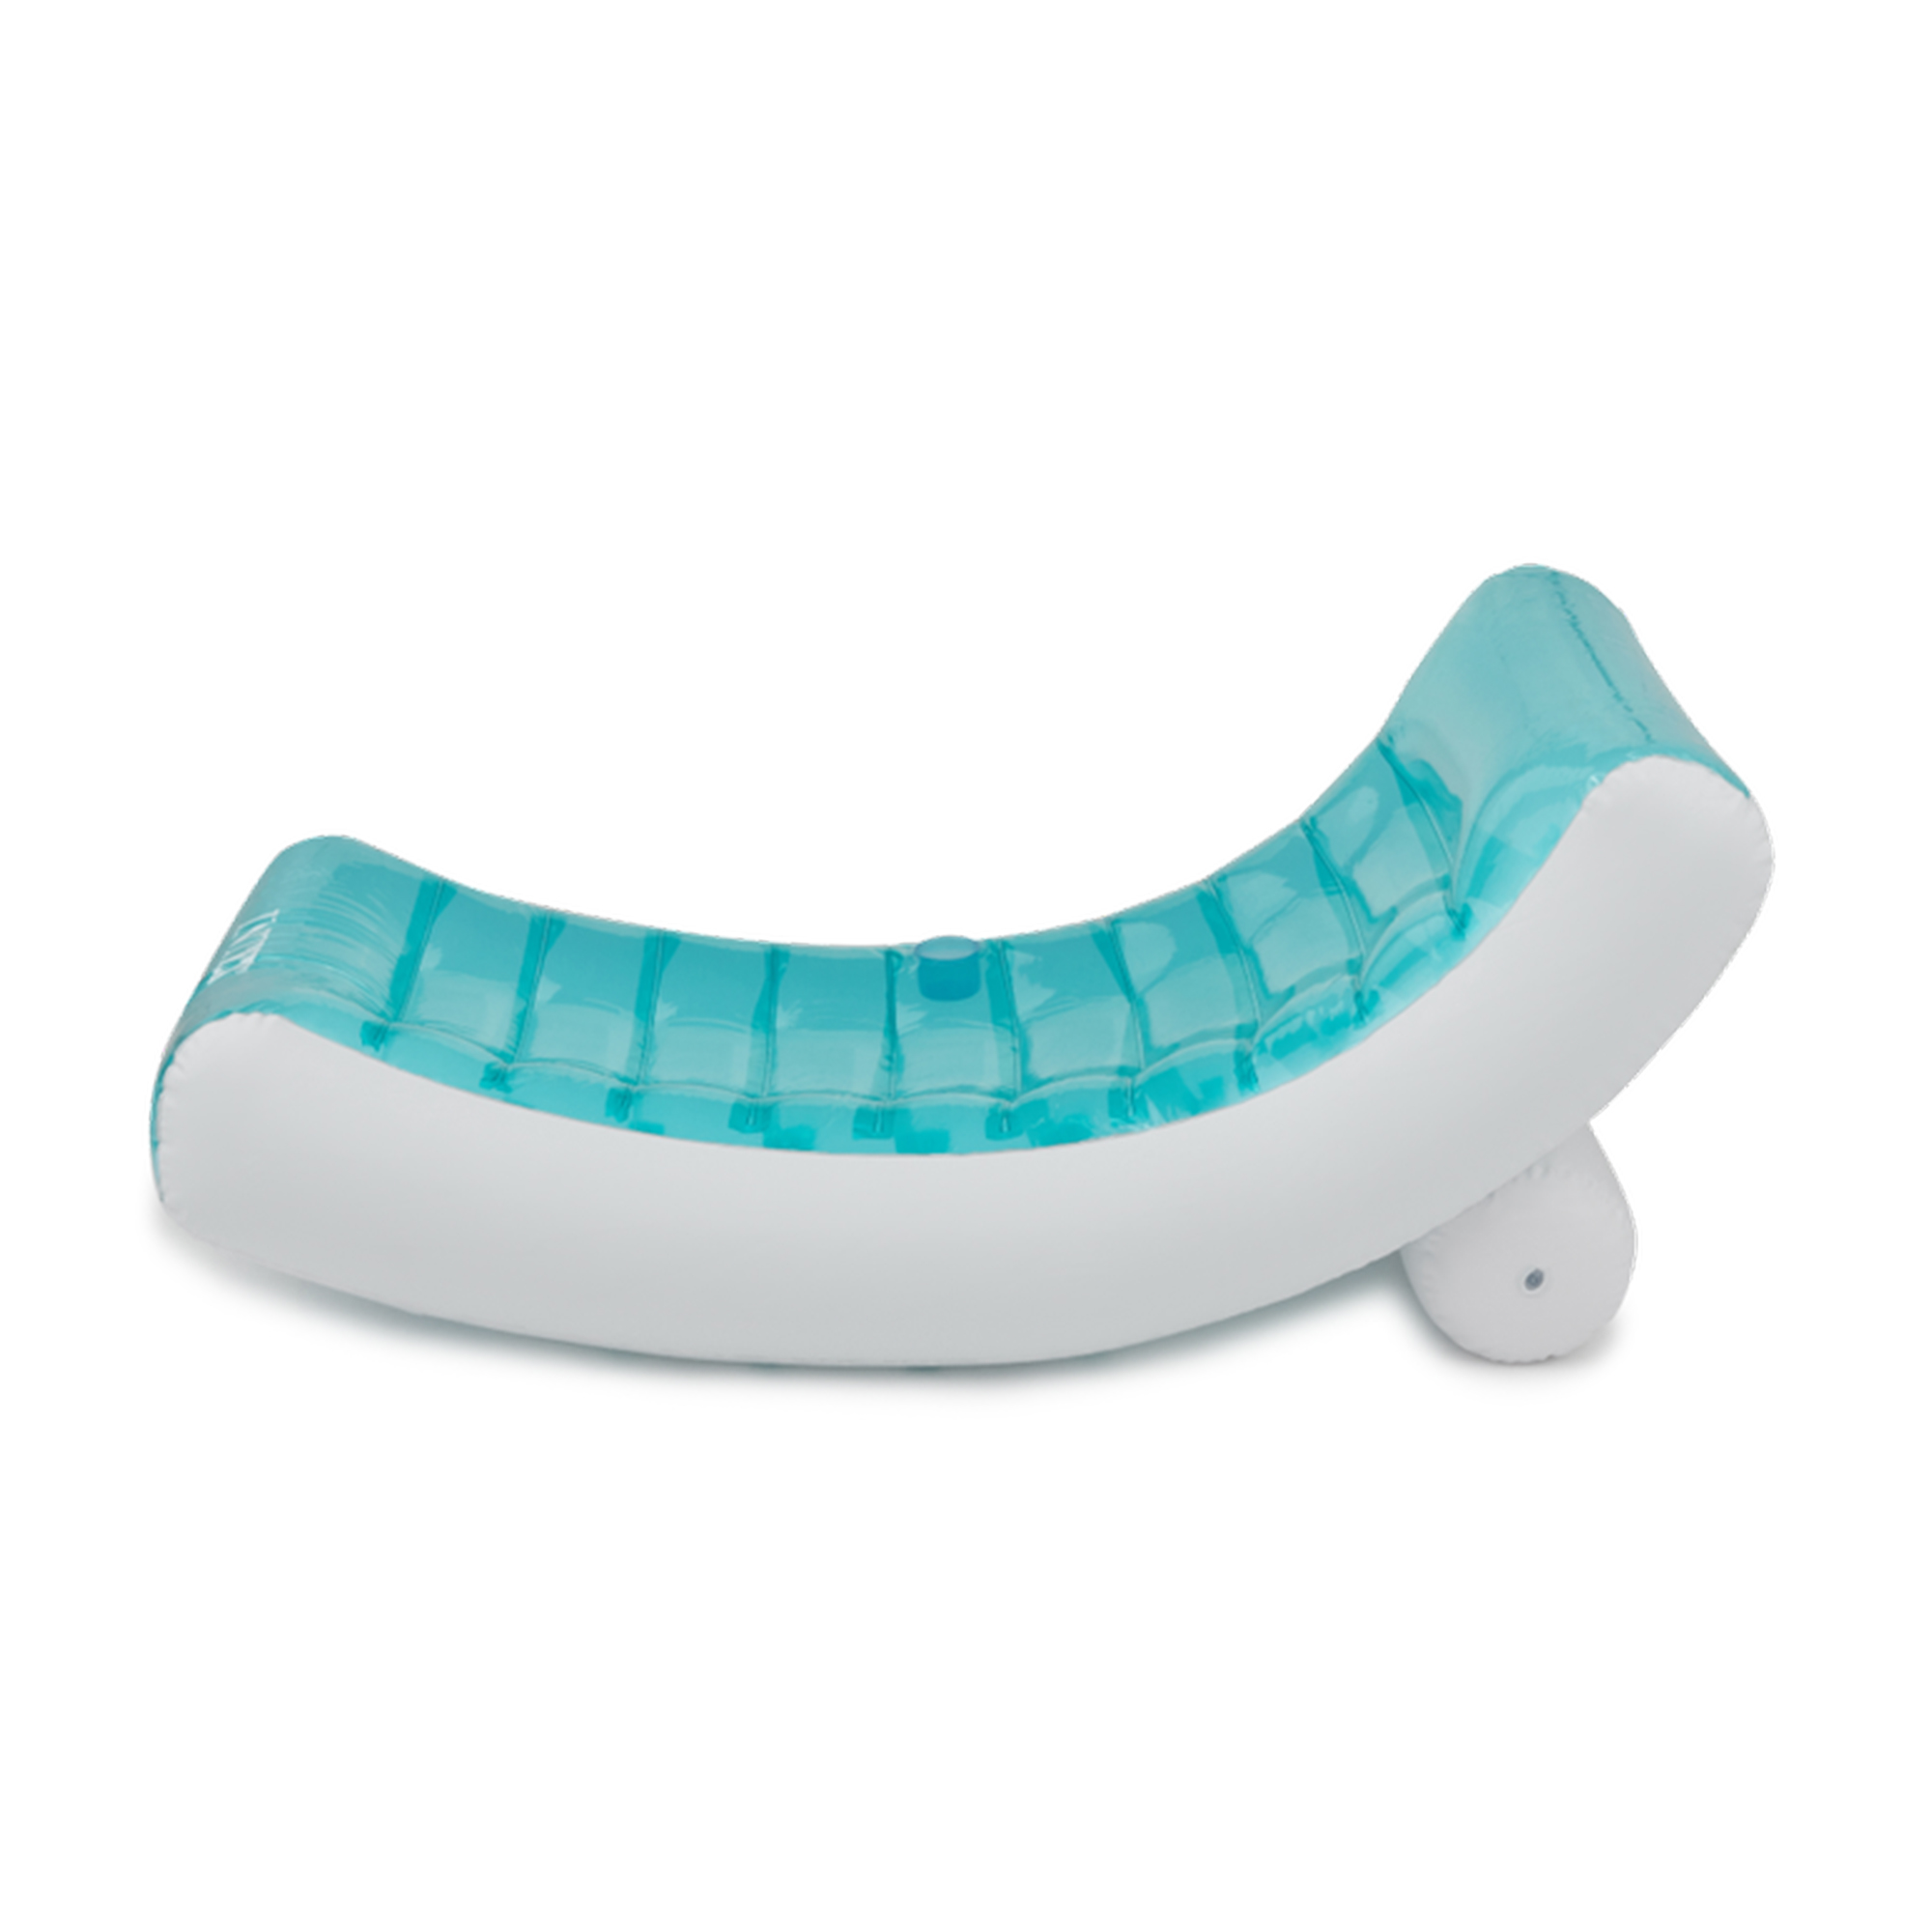 Intex Adult Transparent Blue  Inflatable Rockin' Lounge Swimming Pool Lounge Chair - image 2 of 6